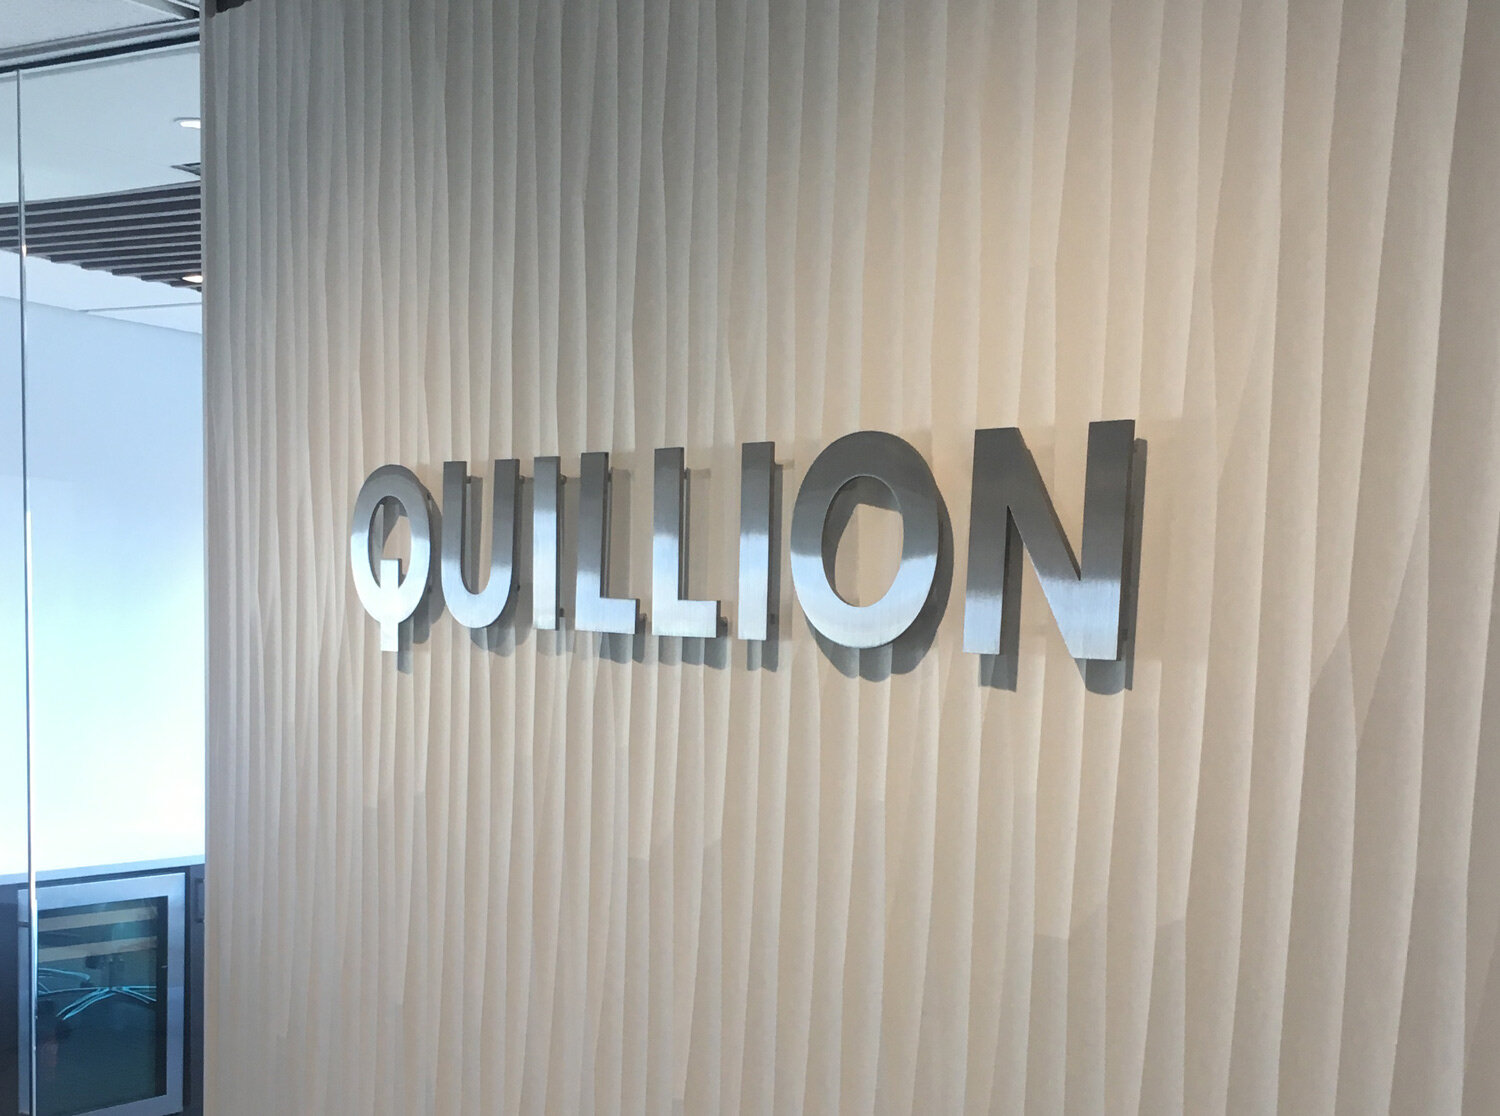 Custom-Metal-Sign-Quillion-Stainless-Steel-Individual-Letters.jpg